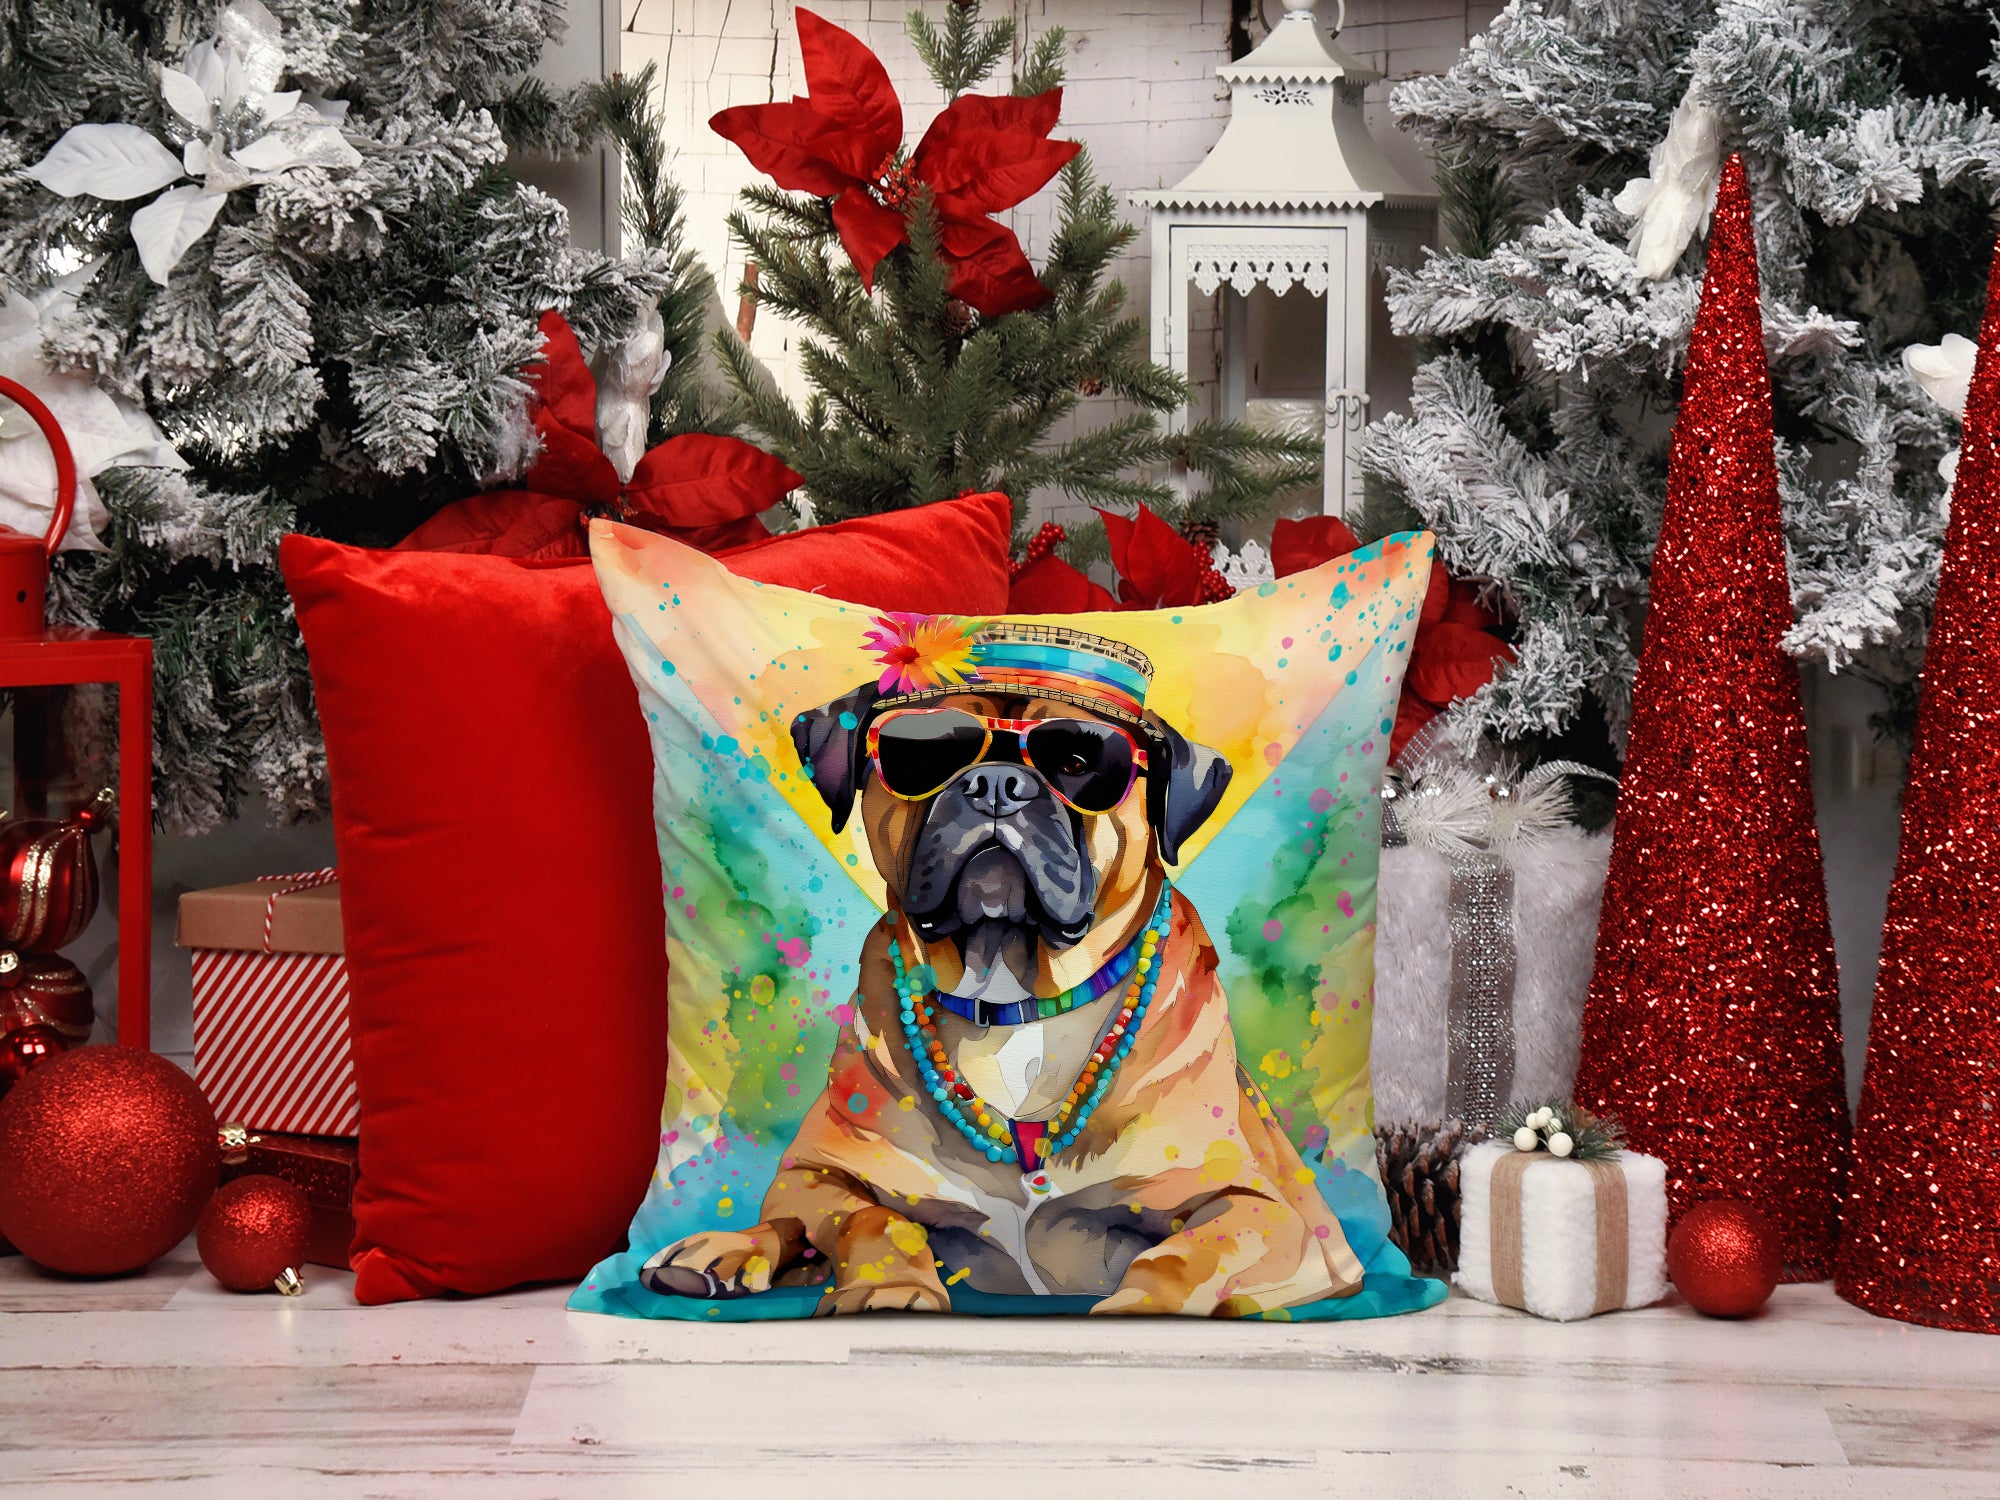 Buy this Cane Corso Hippie Dawg Fabric Decorative Pillow